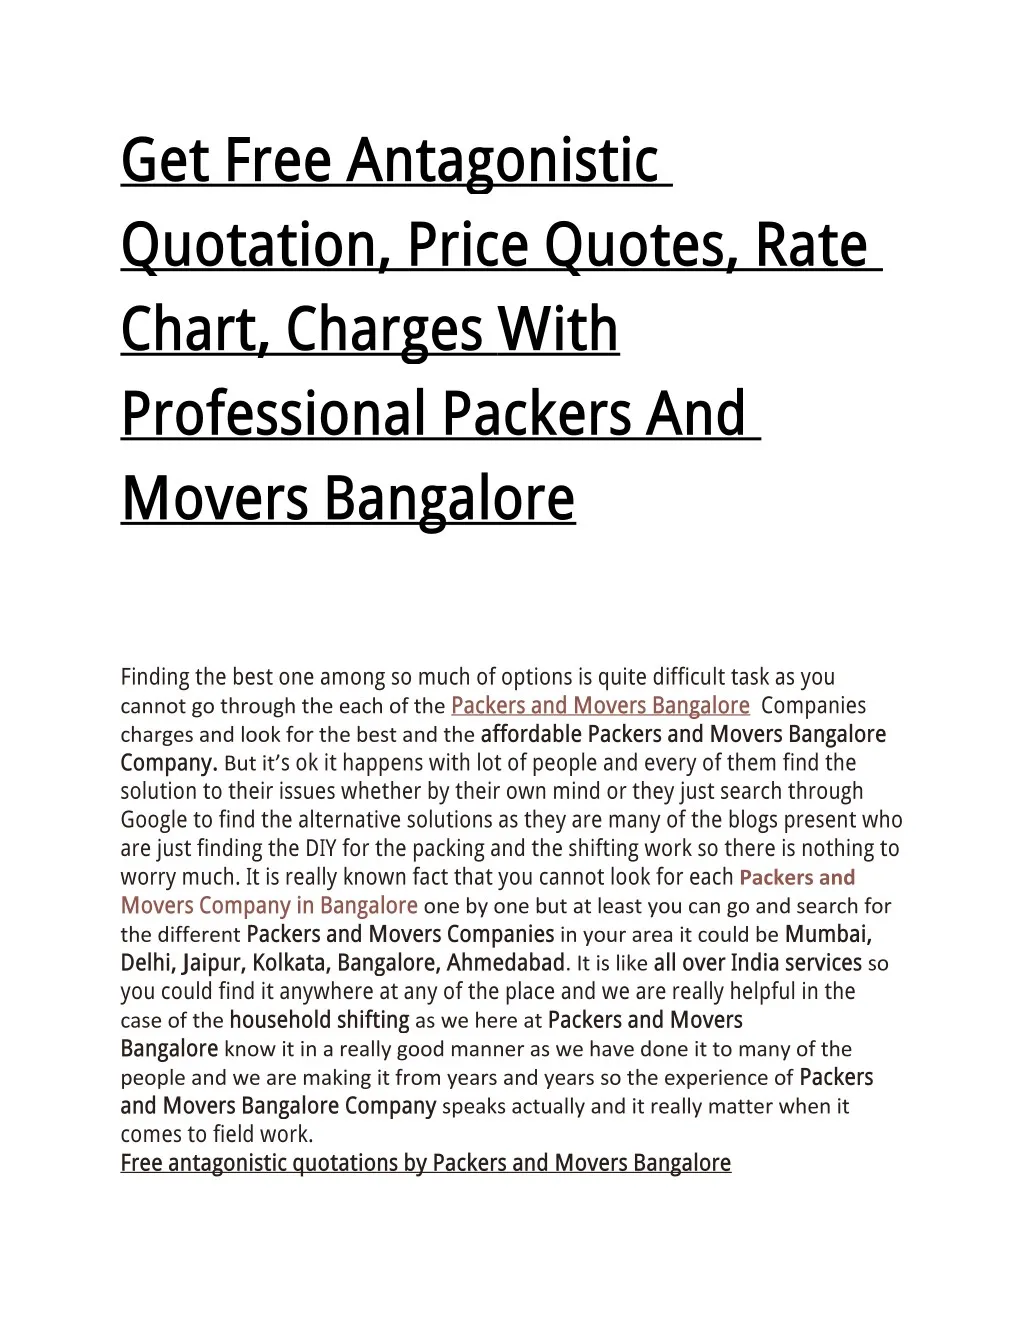 get free antagonistic quotation price quotes rate